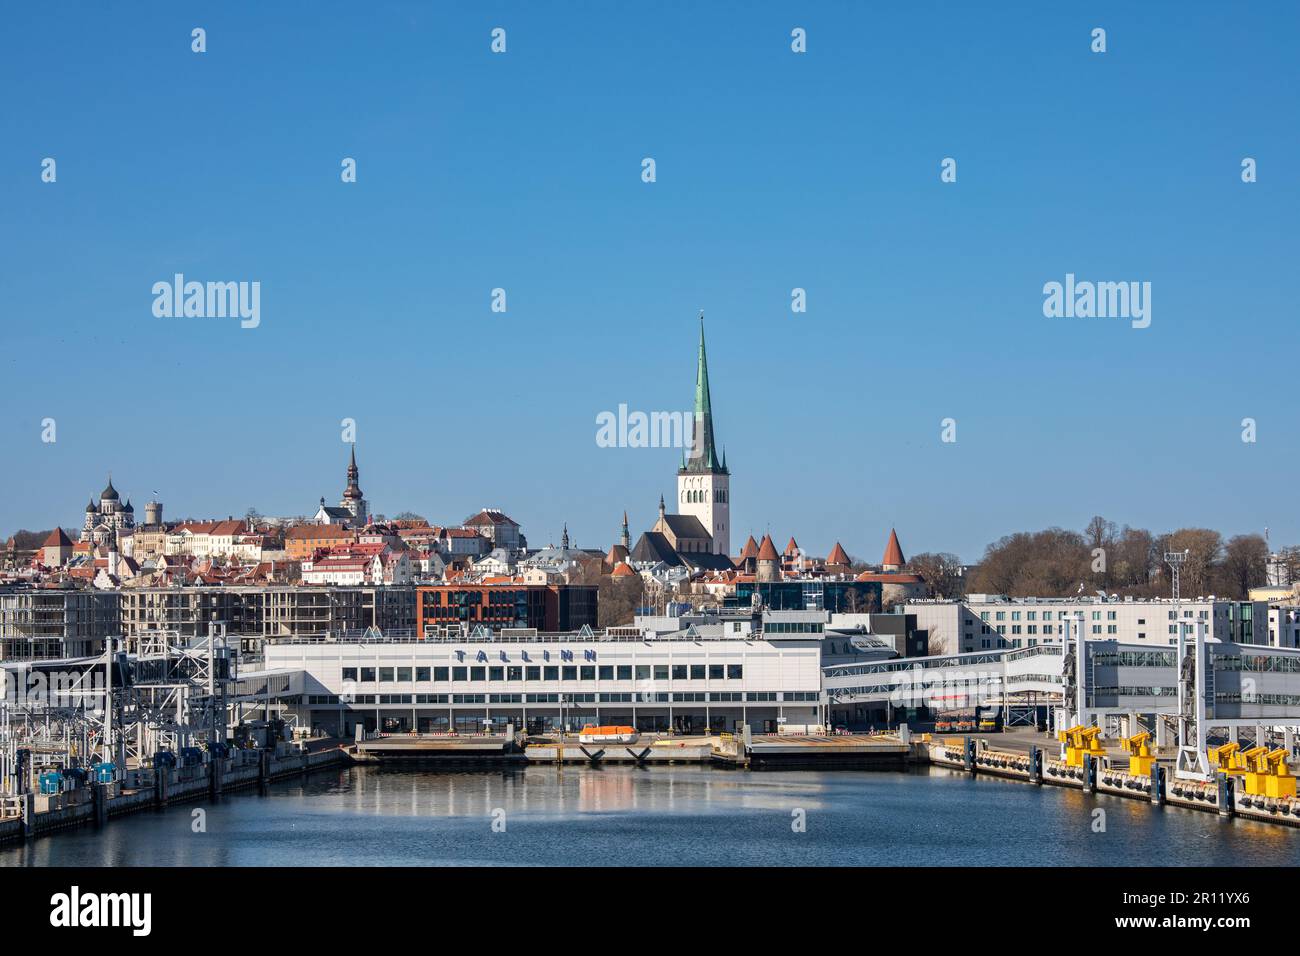 Terminal A of passenger harbor with old town skyline against clear blue sky in Port of Tallinn, Estonia Stock Photo